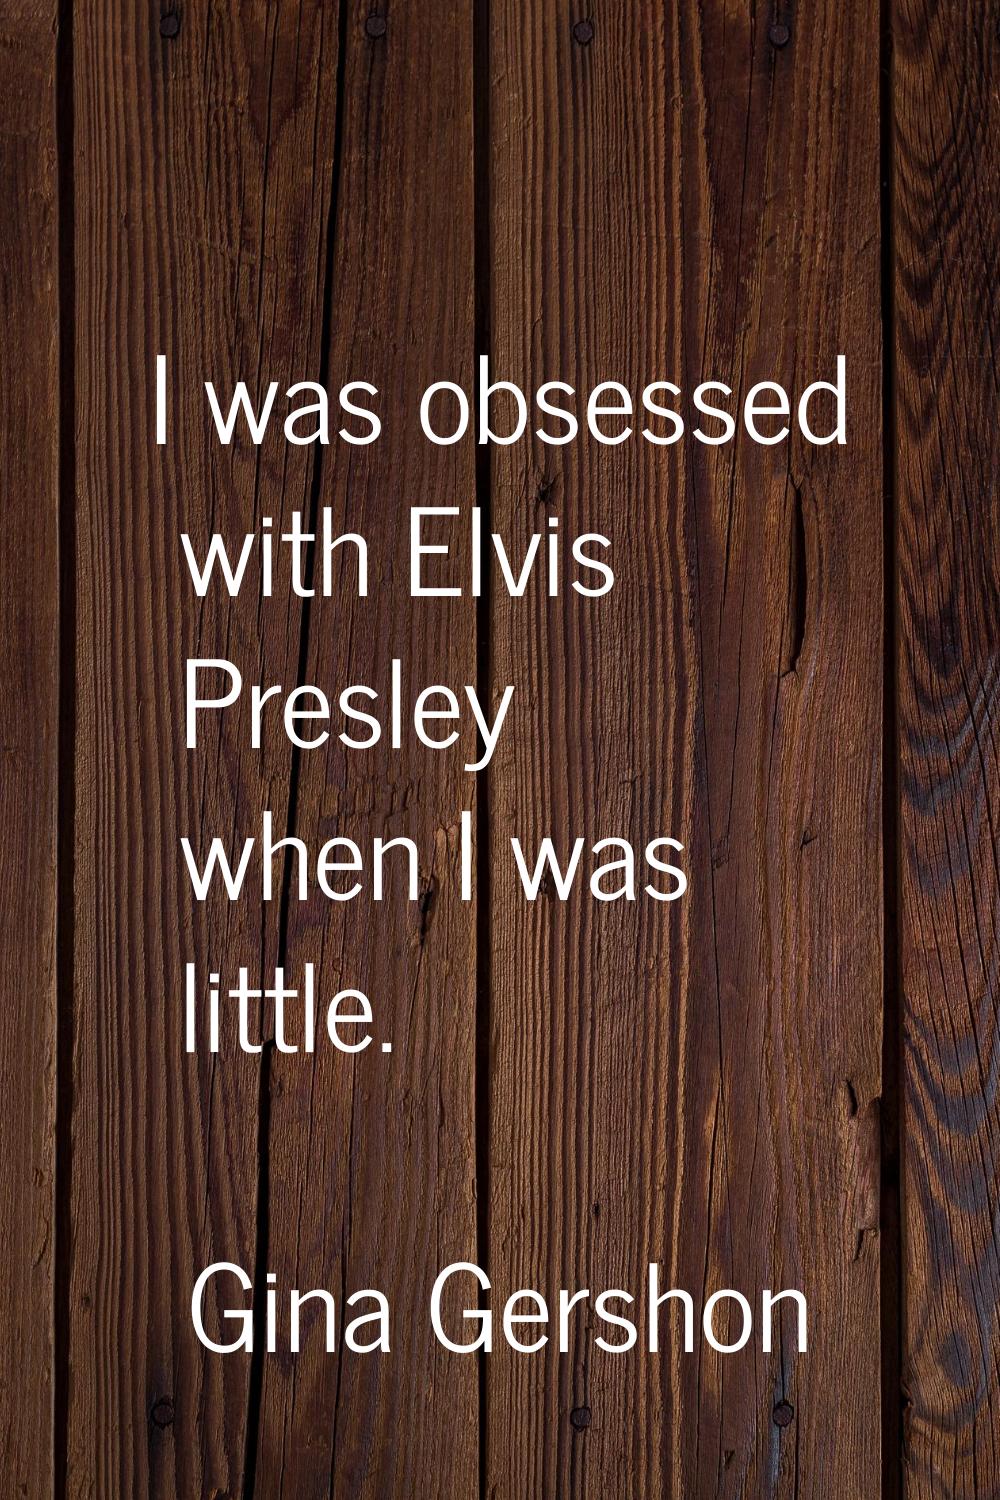 I was obsessed with Elvis Presley when I was little.